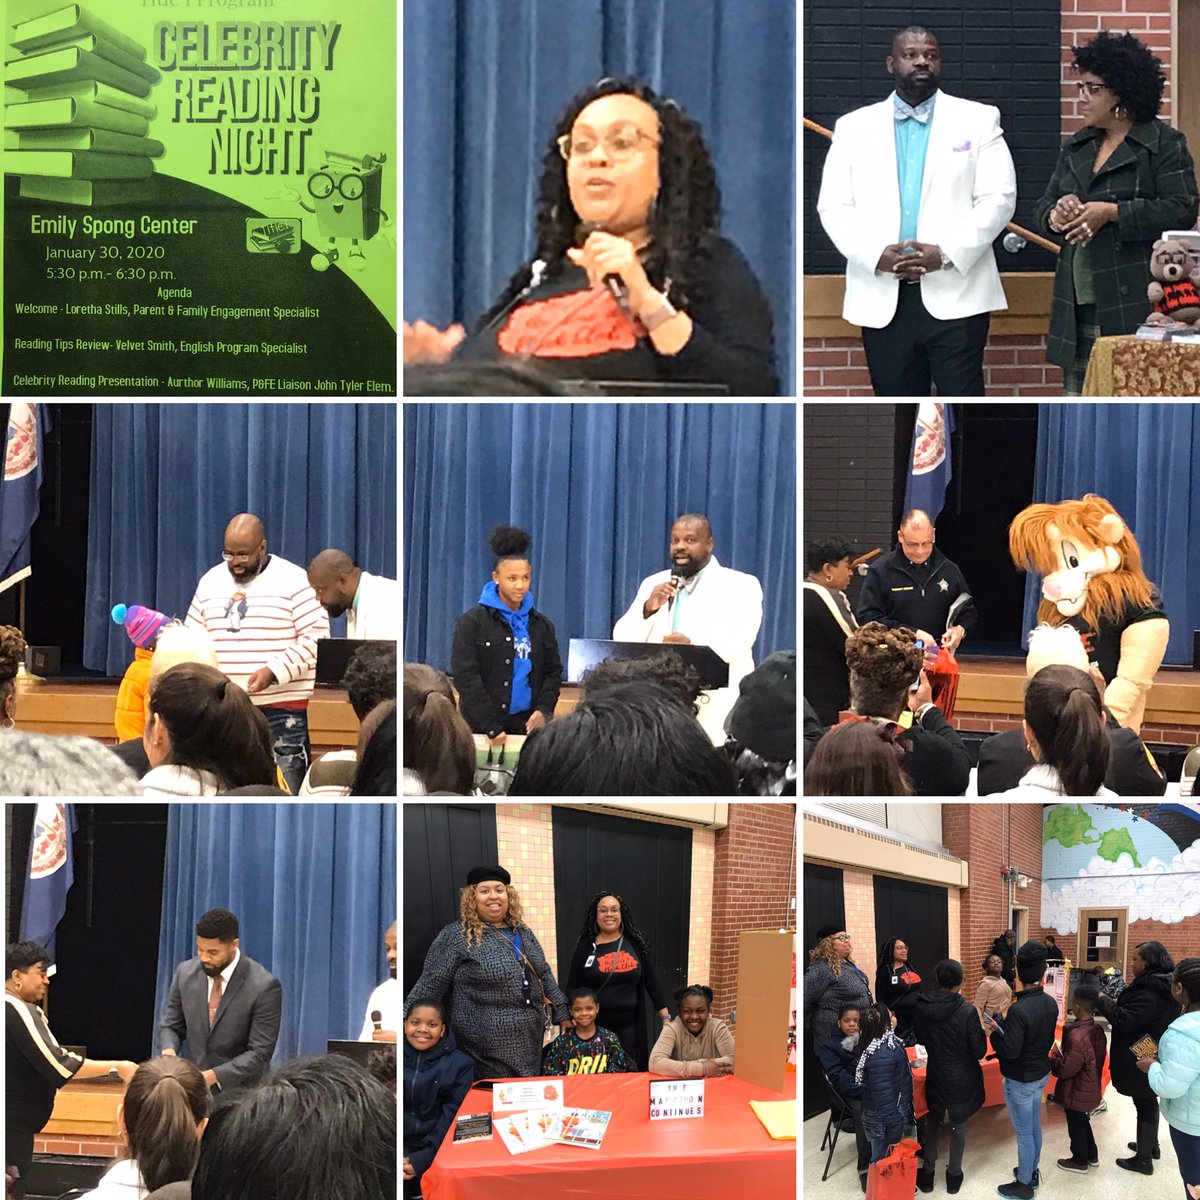 I thoroughly enjoyed the Celebrity Reading Night at ⁦@EmilySpong_pps⁩. Thank you to ⁦@in8days⁩ and ⁦@LorethaStills⁩ for planning such a wonderful event. #ppsshines ⁦@JohnTylerElem⁩ ⁦@hmeducate⁩ ⁦@ArtWill06761312⁩ ⁦@PortsVASchools⁩